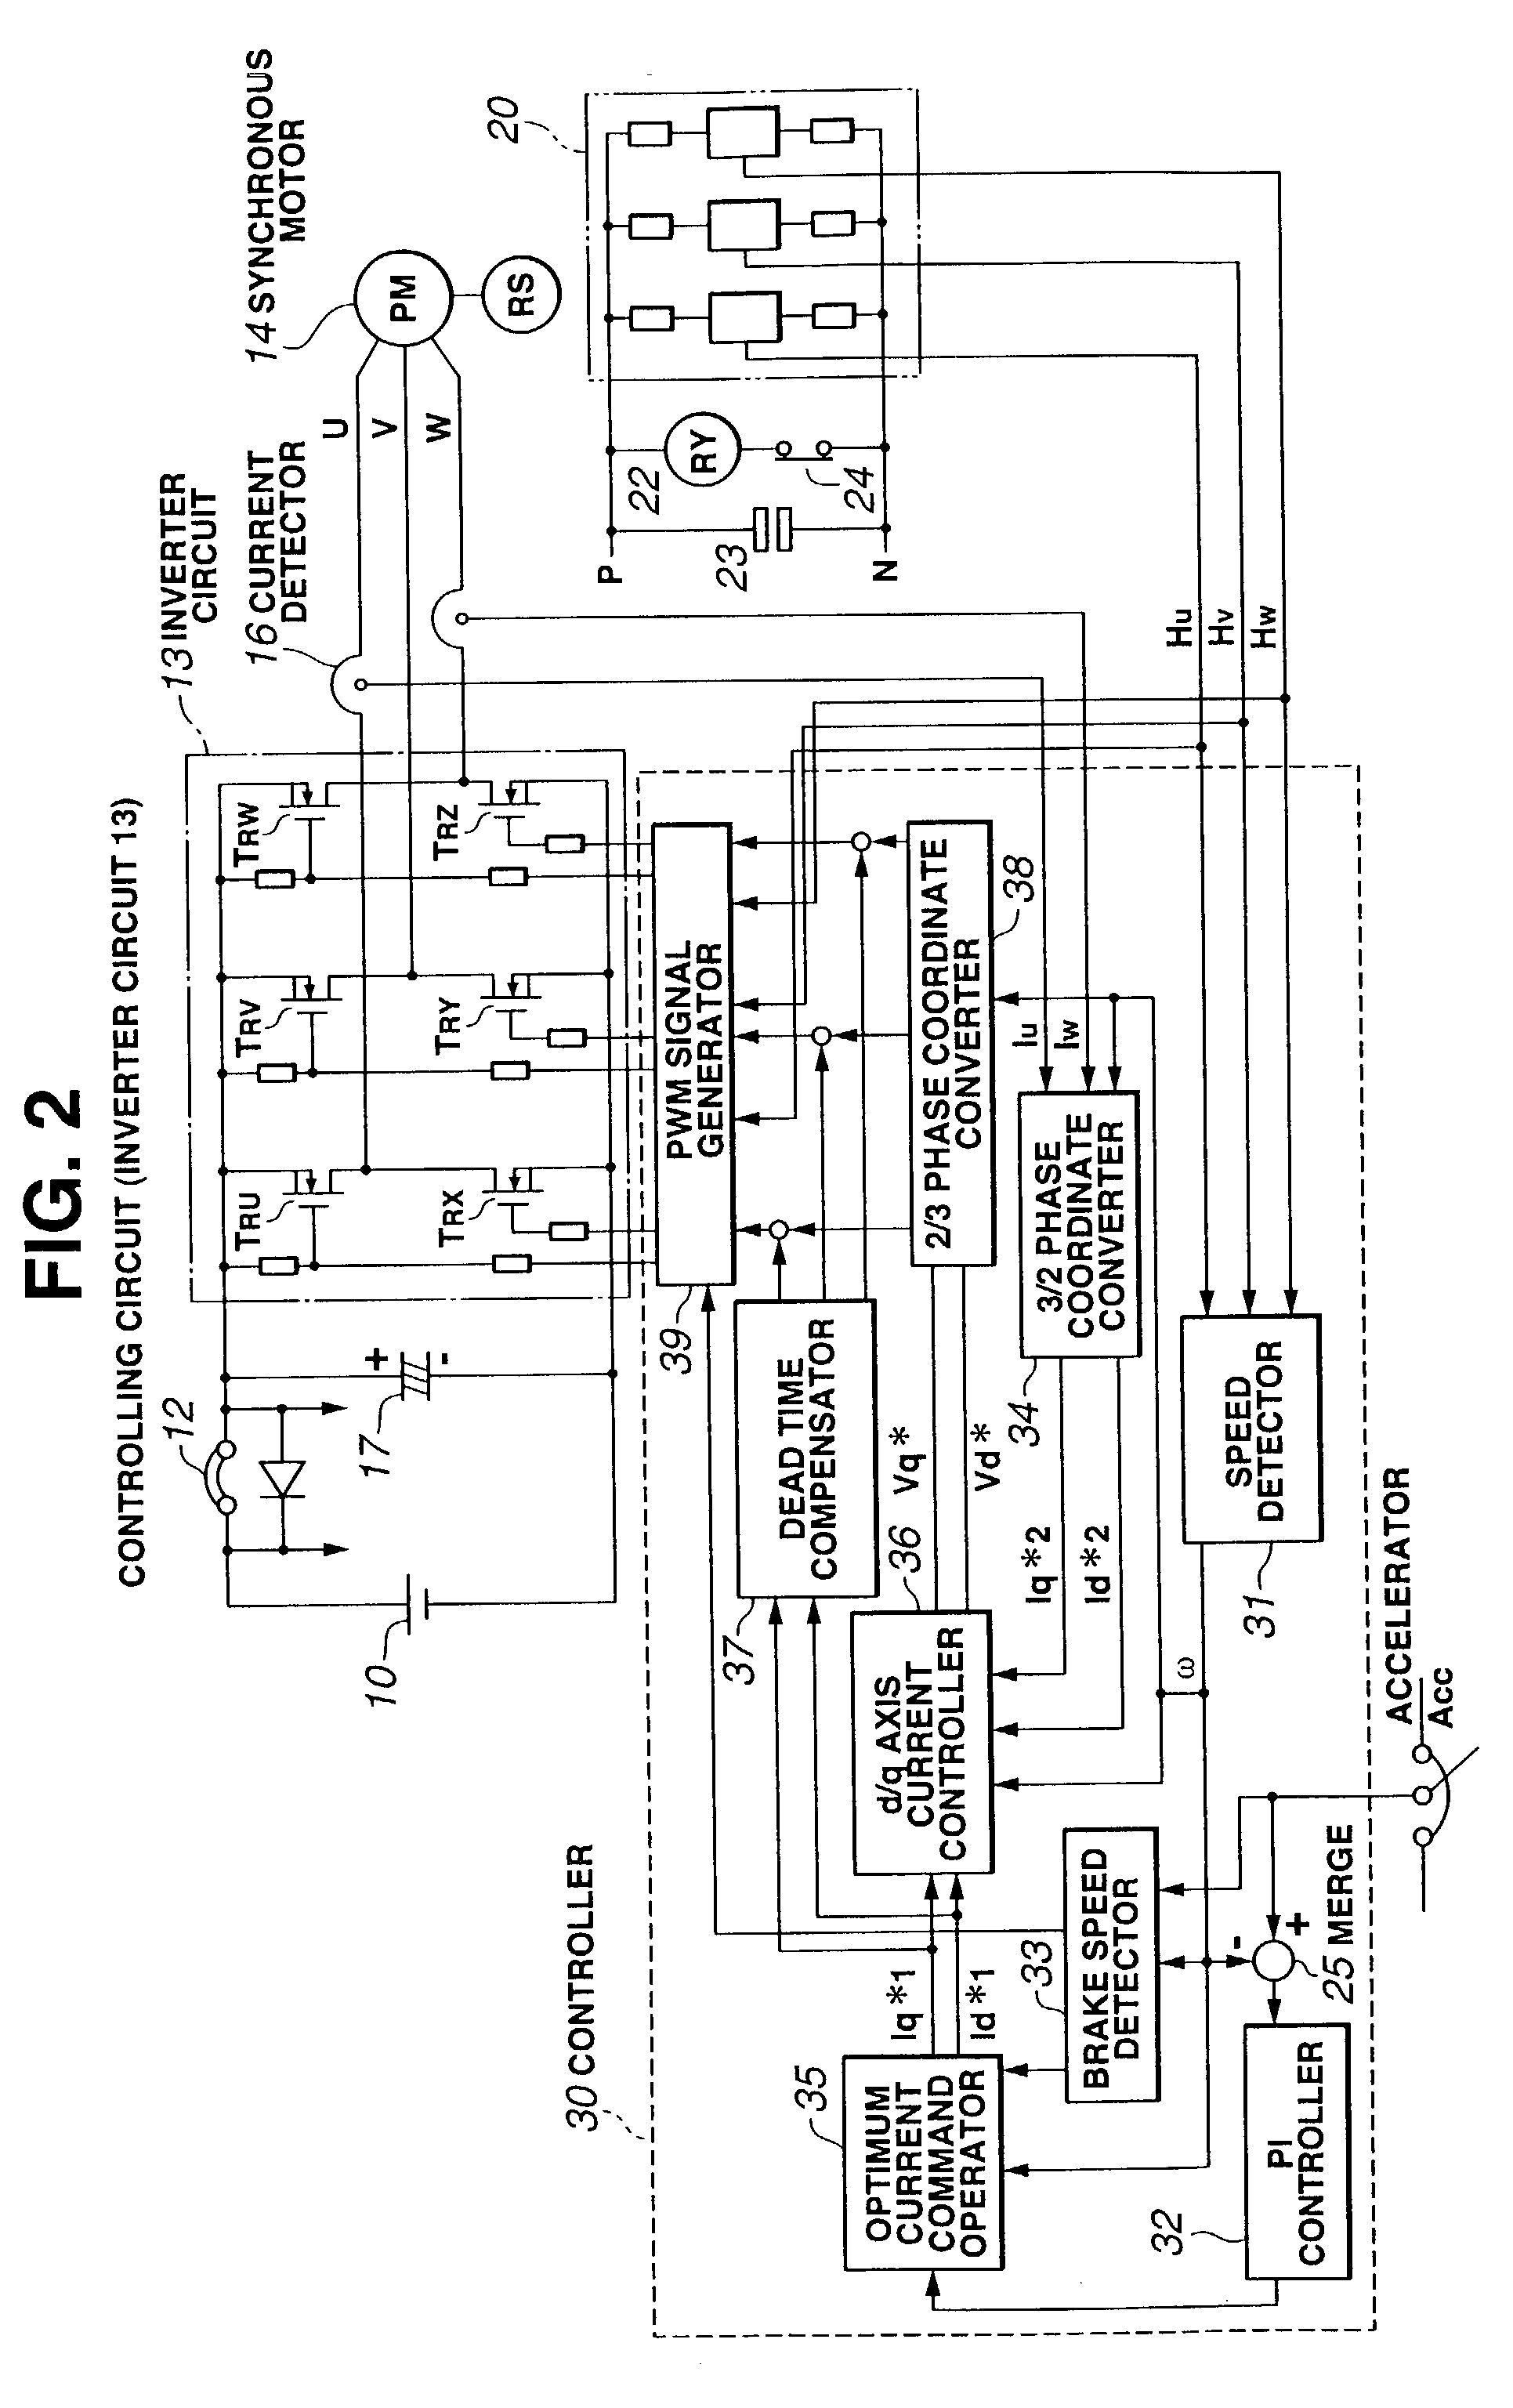 Method and apparatus of controlling electric vehicle